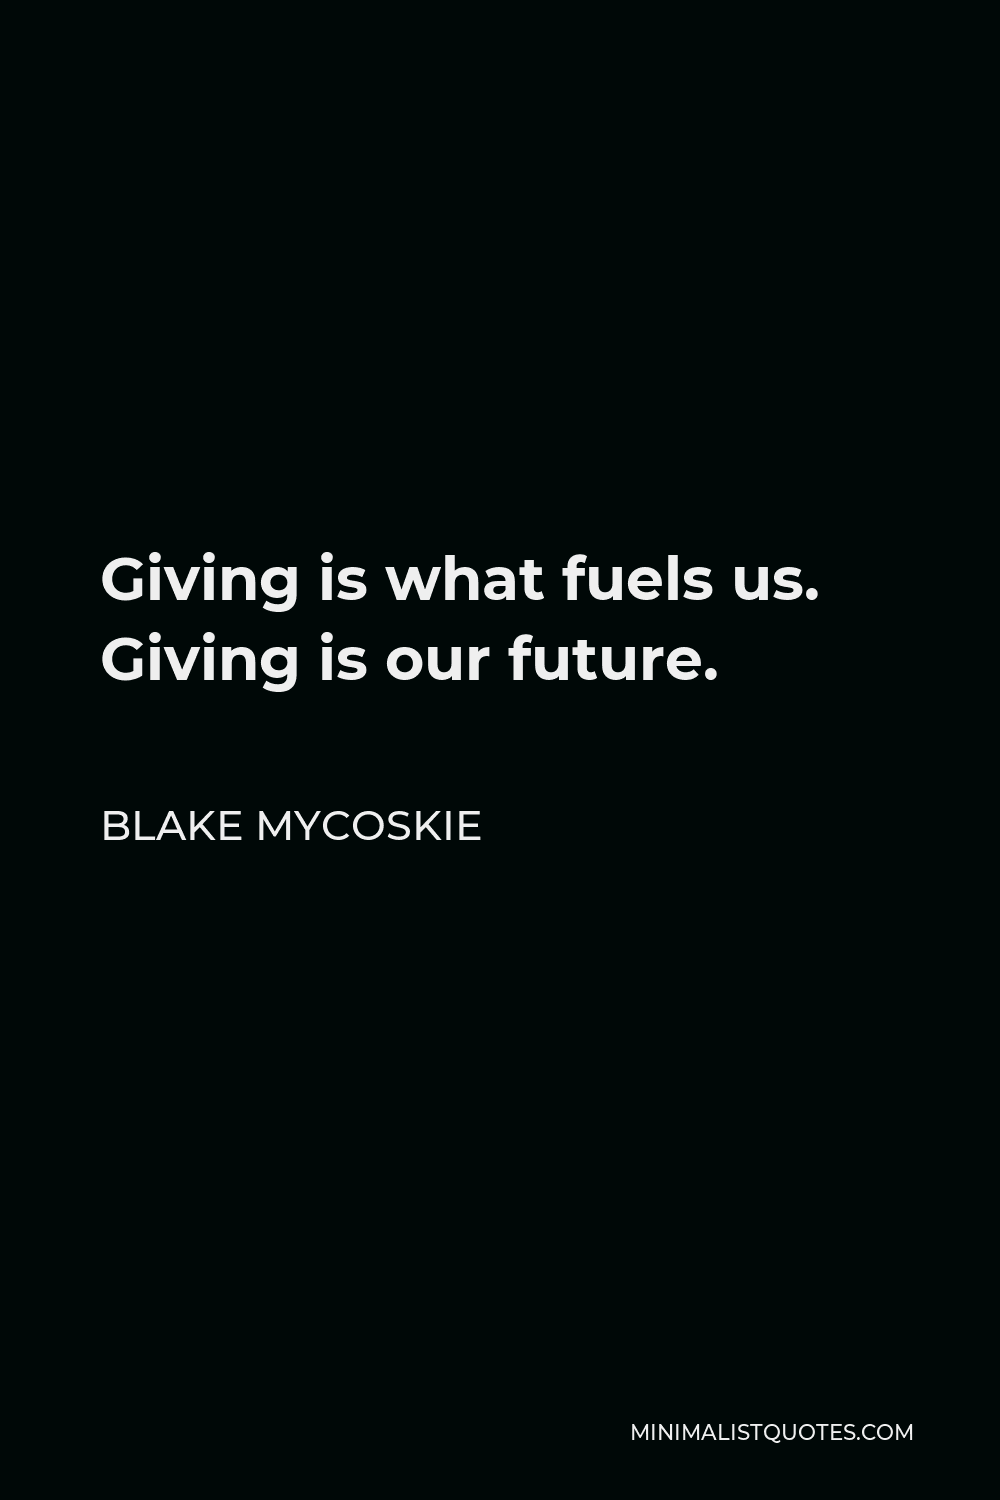 Blake Mycoskie Quote - Giving is what fuels us. Giving is our future.